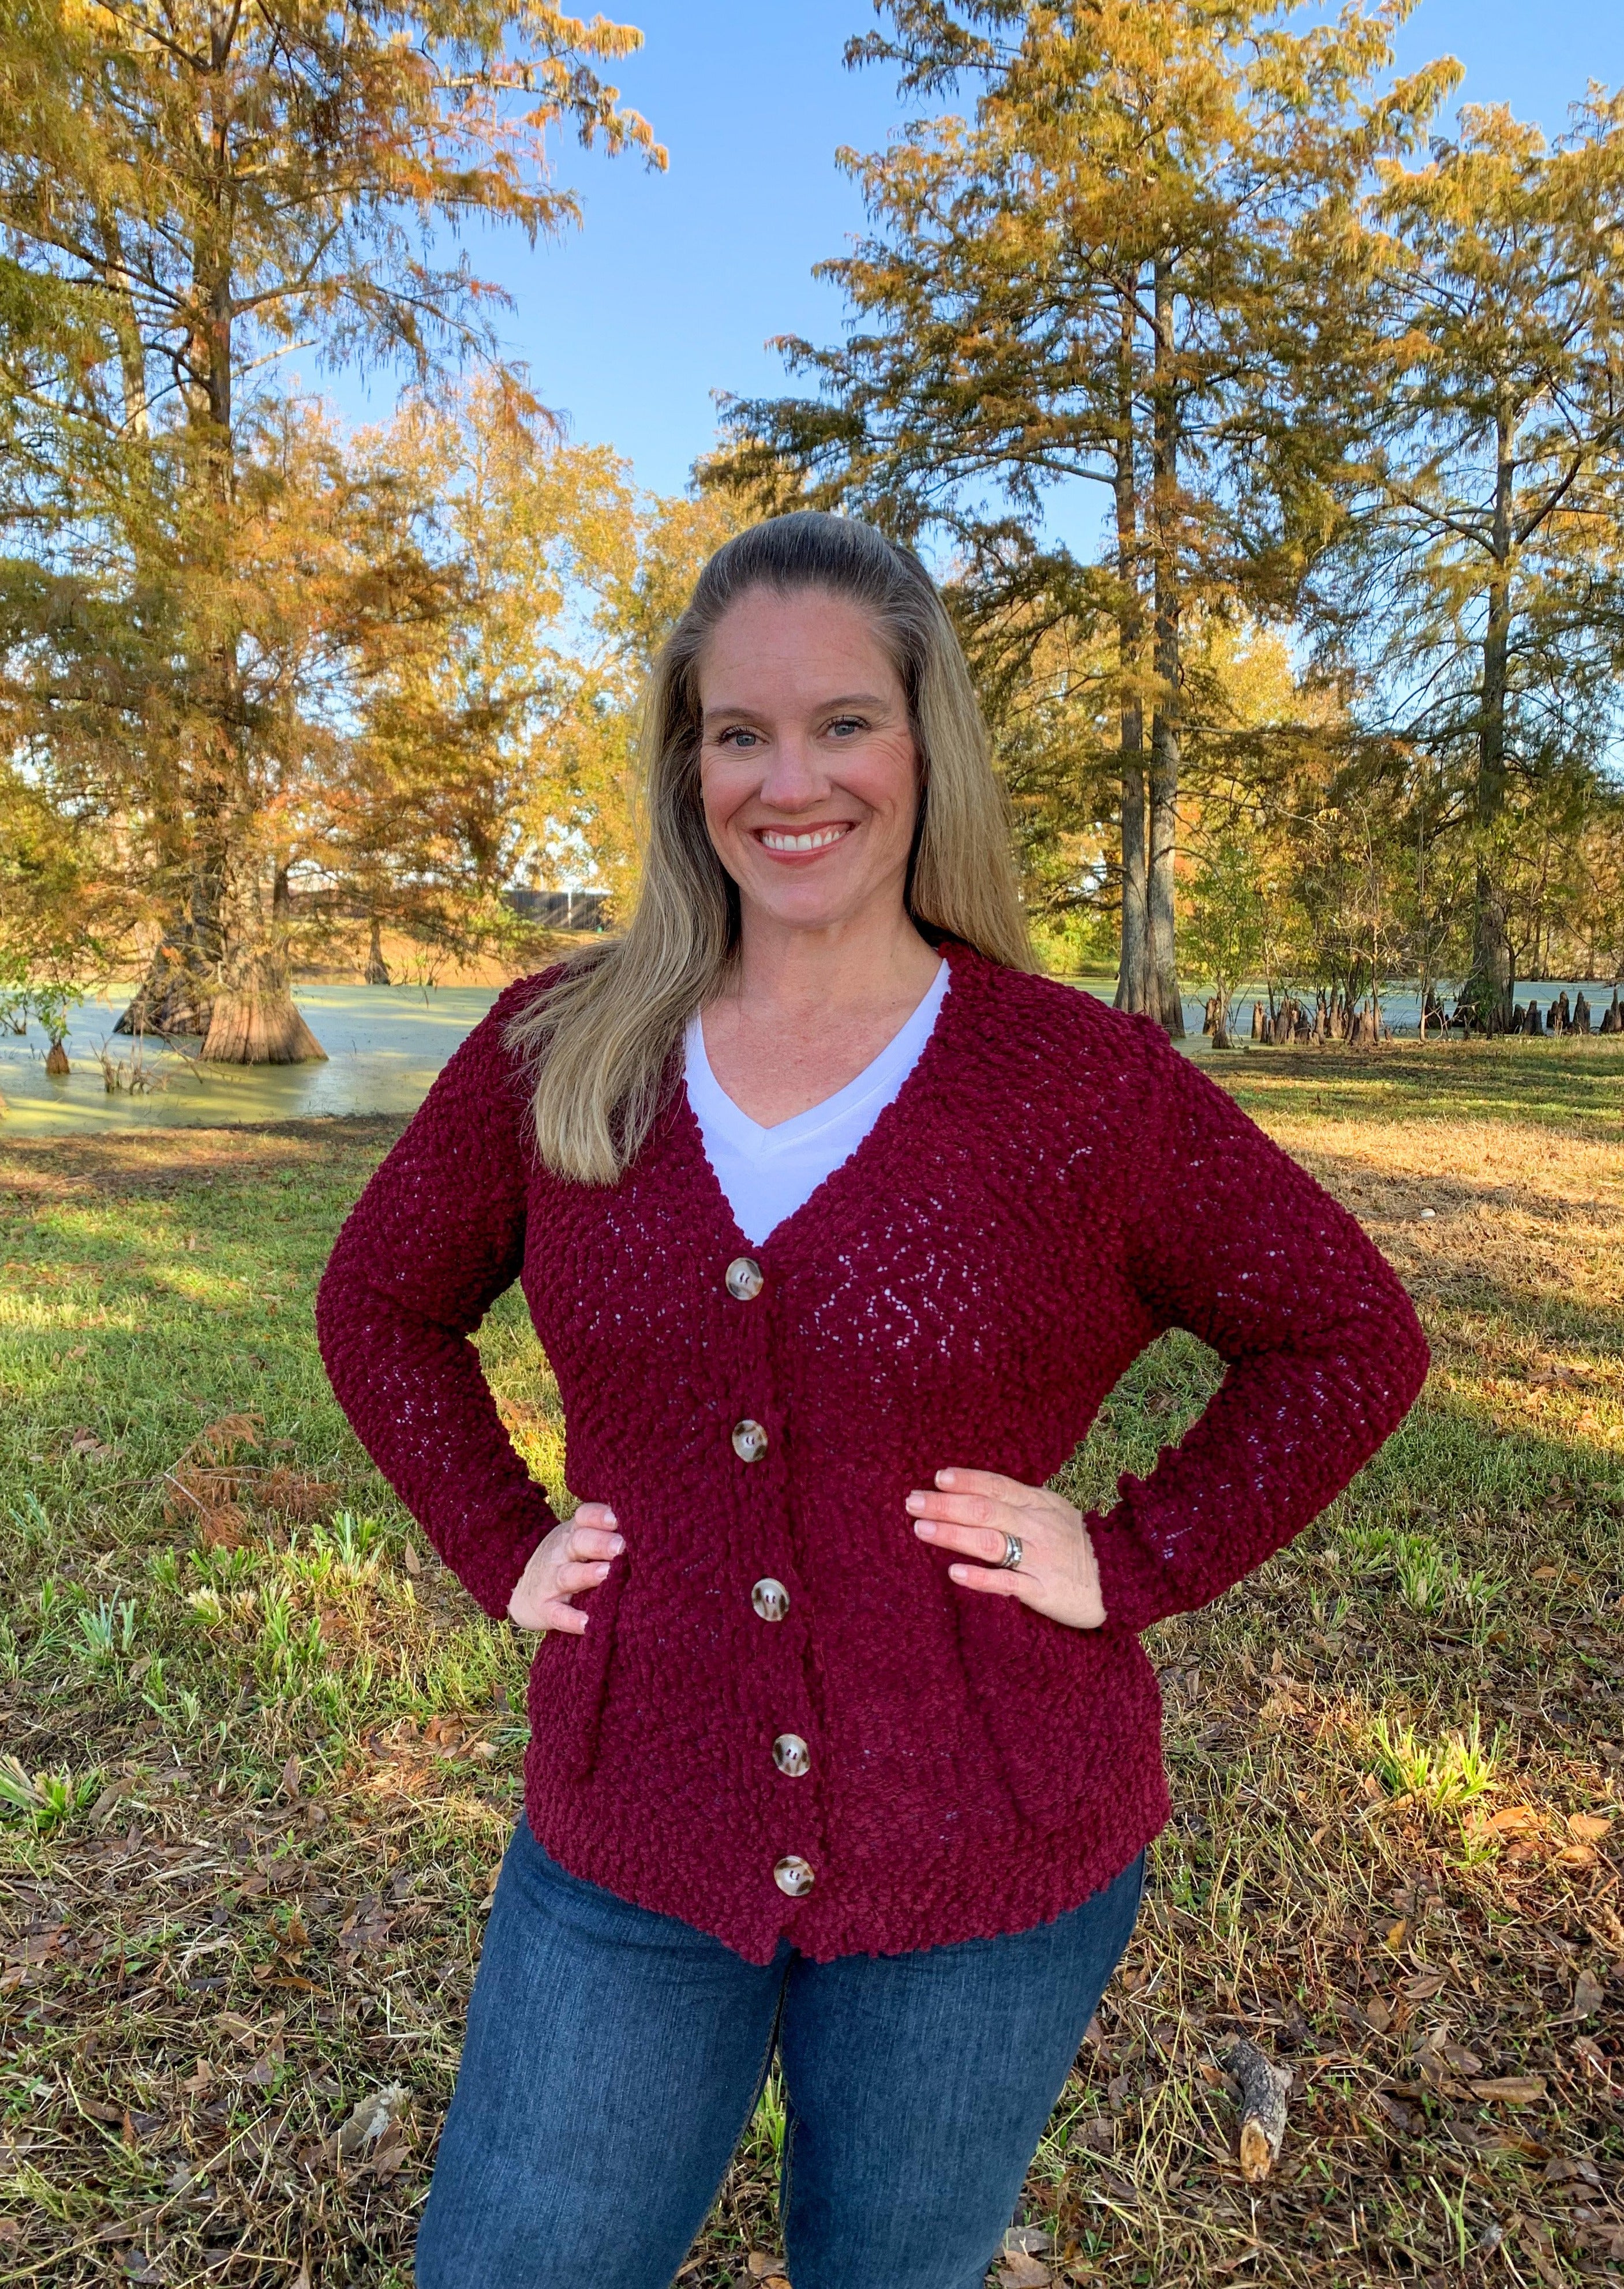 Burgundy Popcorn Cardigan with pockets. Five button front. Very soft and comfy. Front of cardigan.